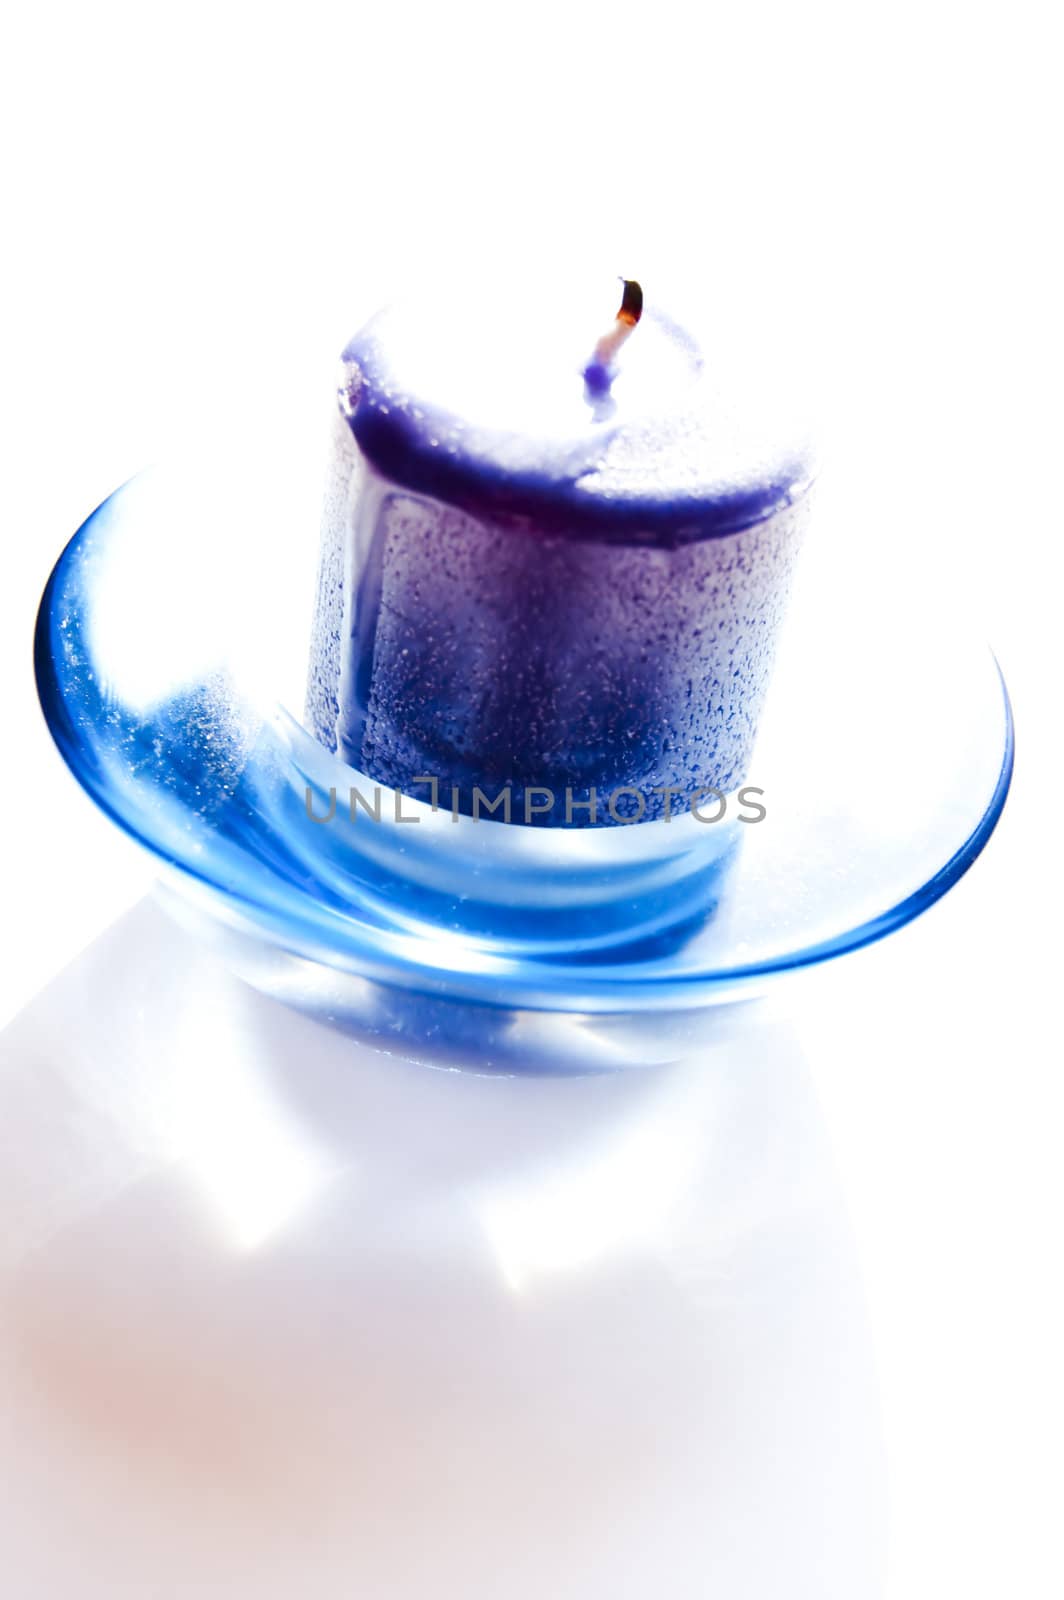 A fresh blue candle isolated on white